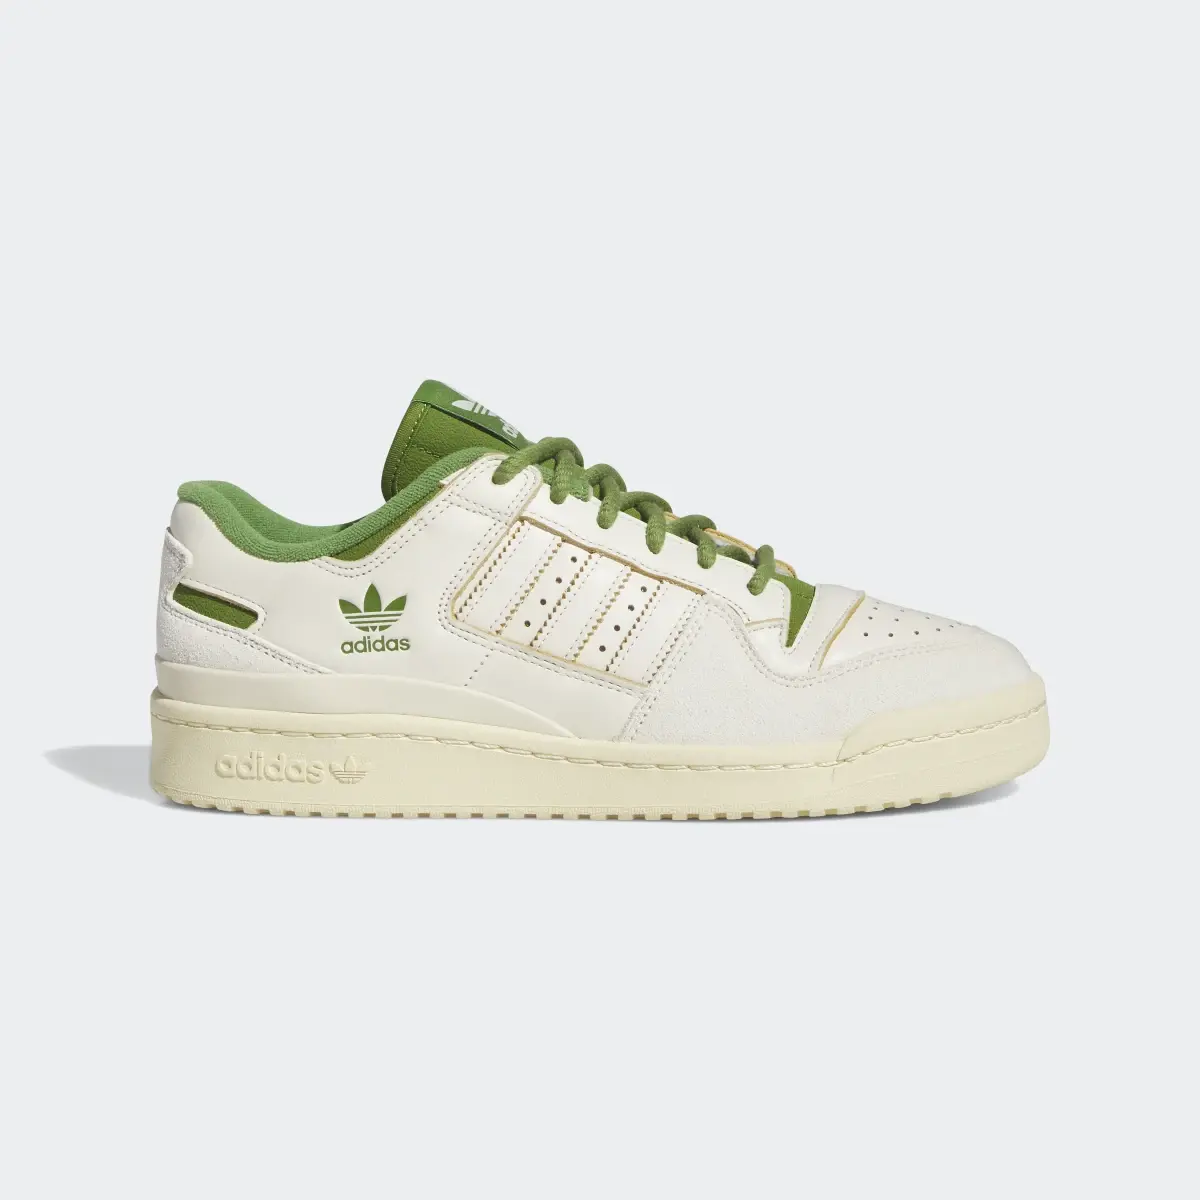 Adidas Forum 84 Low Classic Shoes. 2